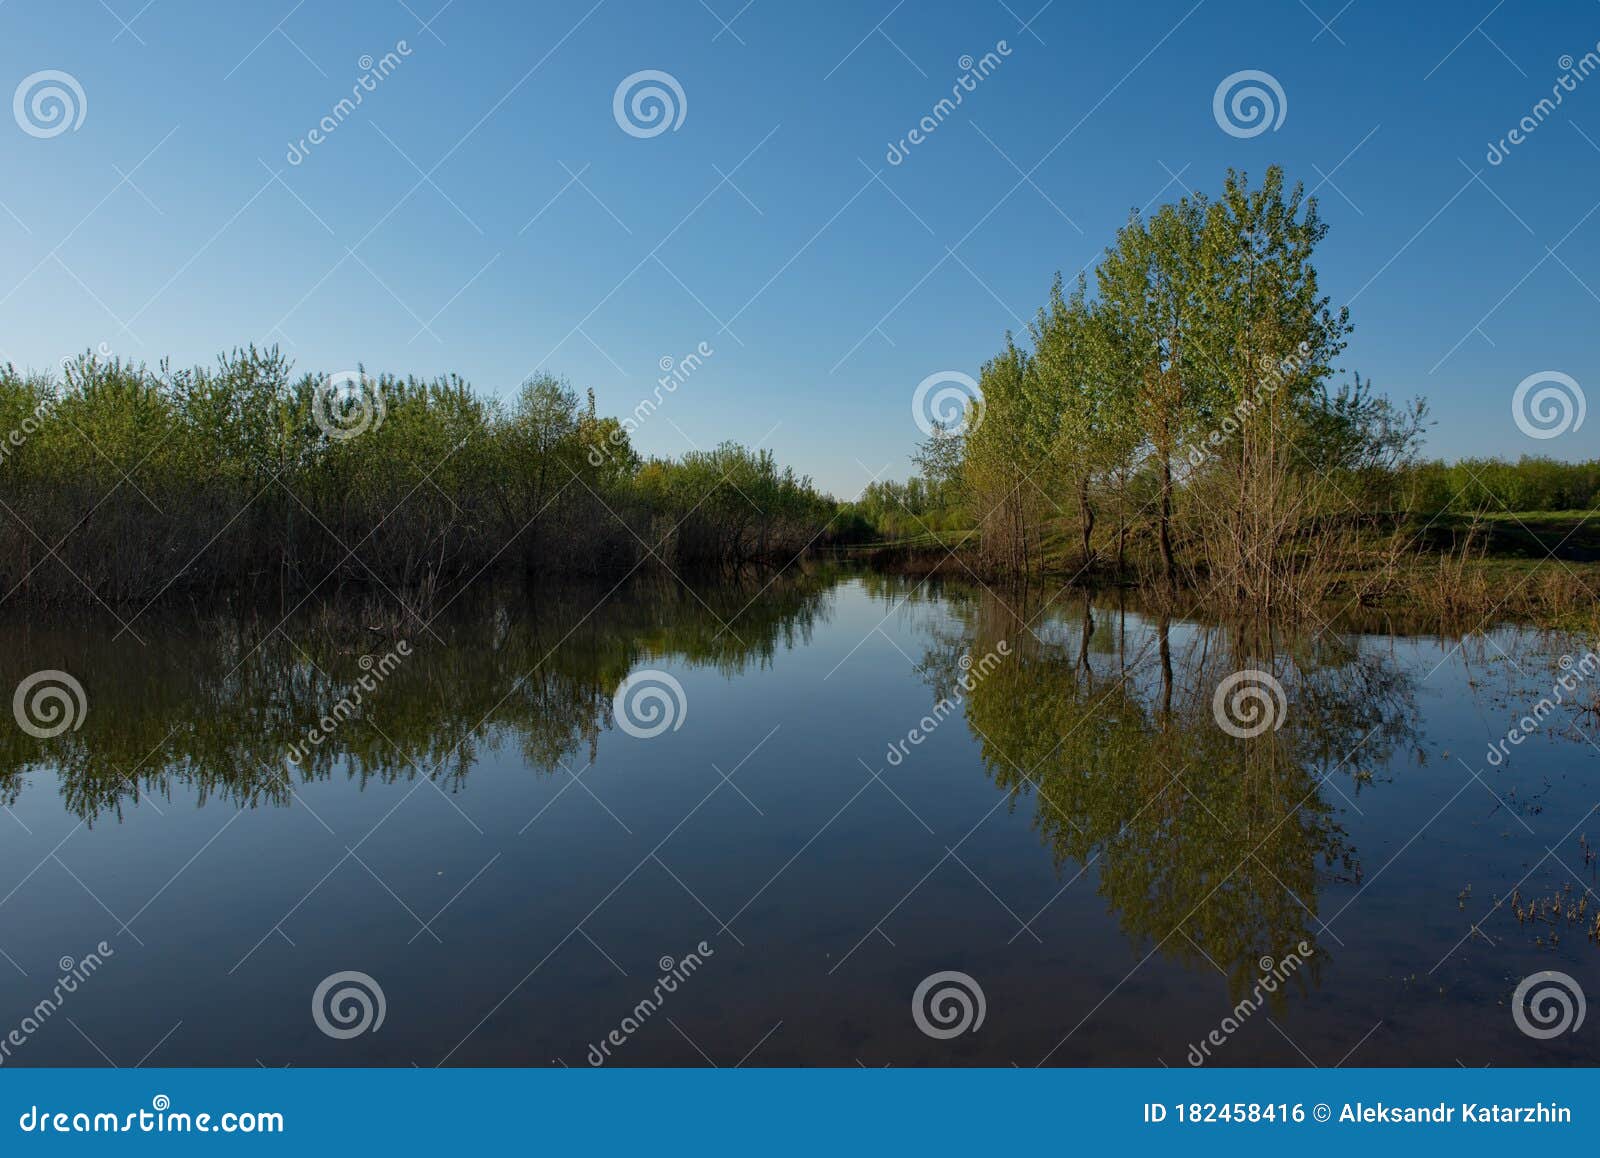 Spring Flood On The Siberian River Stock Photo Image Of Nature River